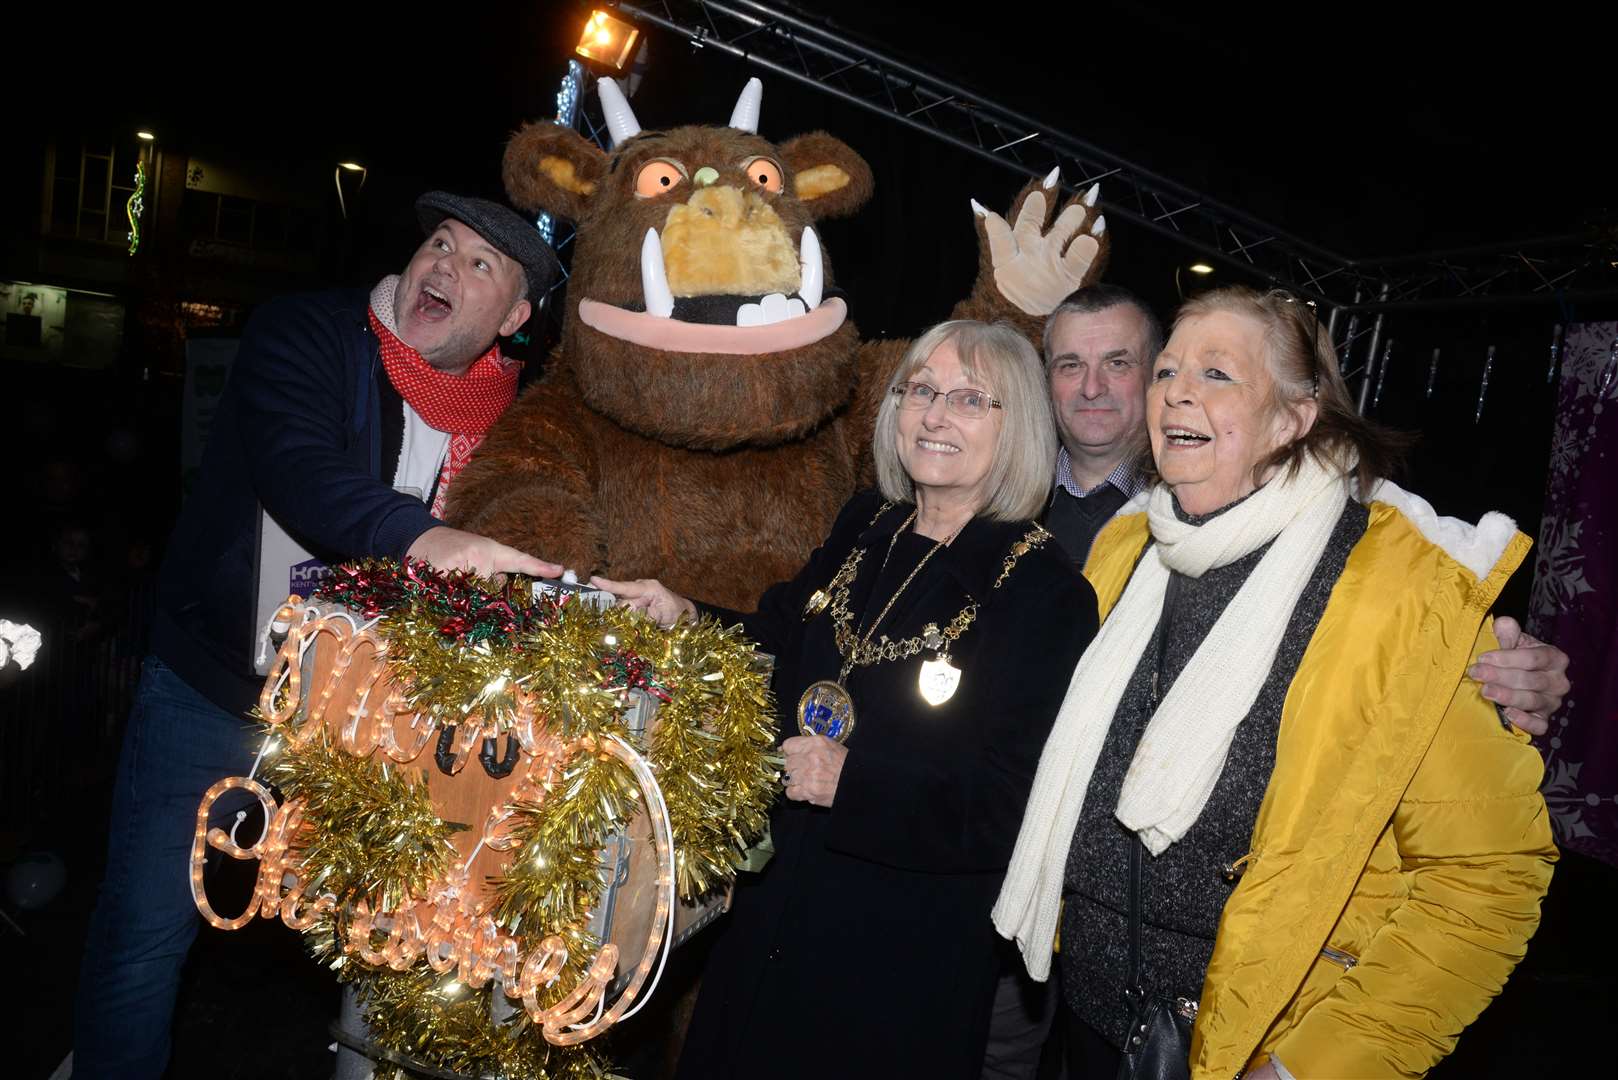 kmfm's Garry Wilson, The Gruffalo, Mayor of Medway Cllr Jan Aldous with Cllrs Richard Thorne and Jane Chitty switch on the Christmas lights in Strood. Picture: Chris Davey